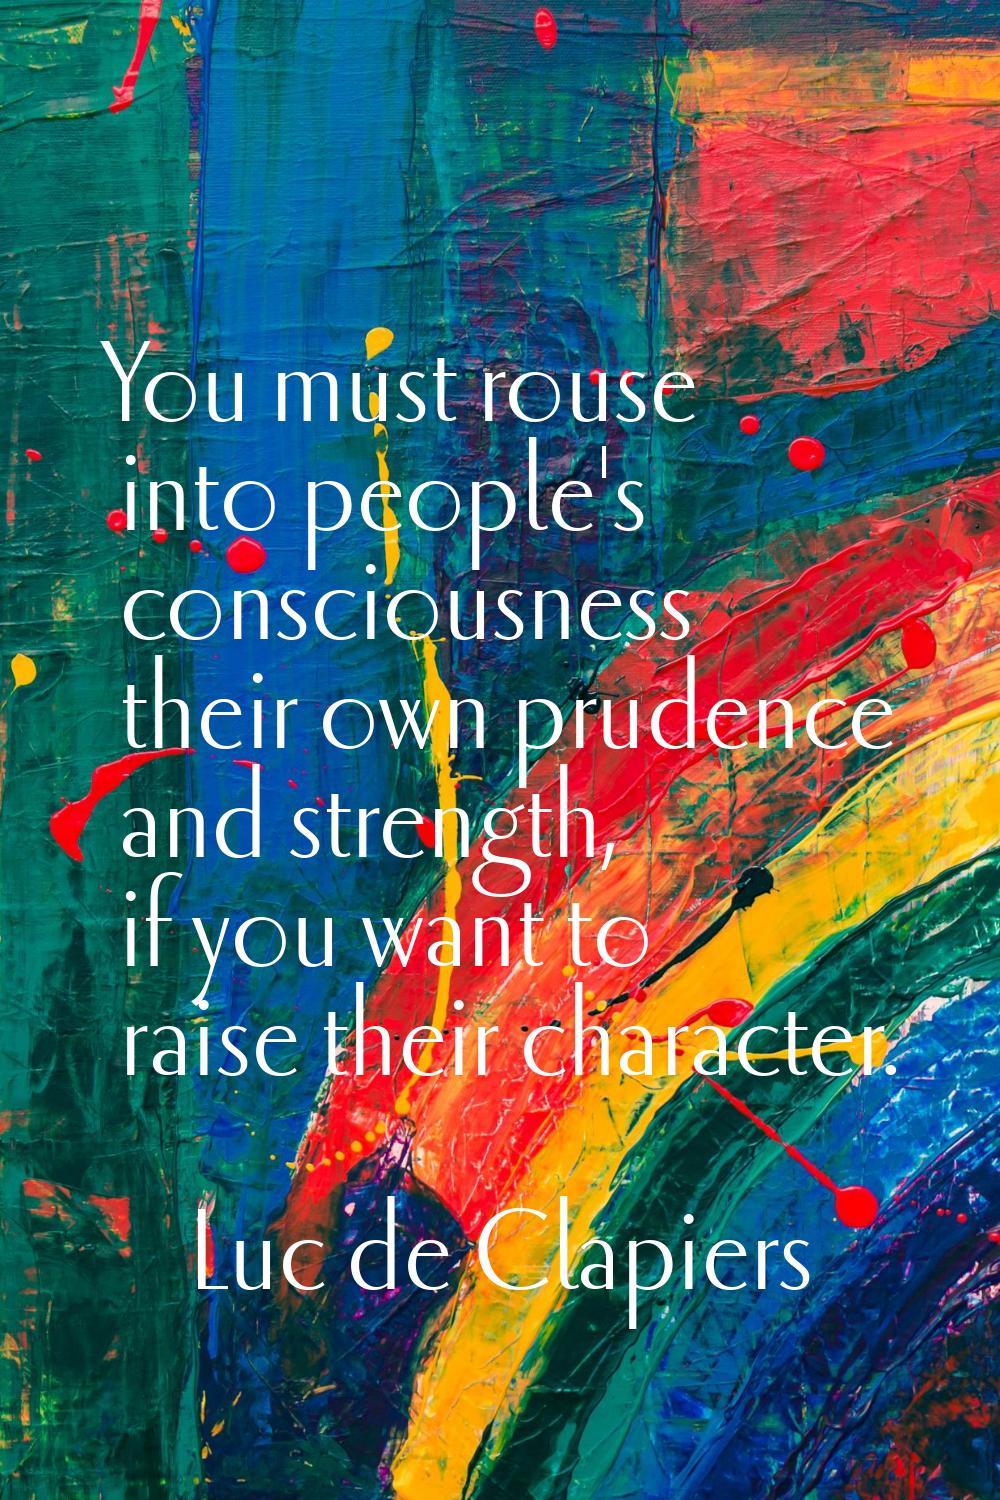 You must rouse into people's consciousness their own prudence and strength, if you want to raise th